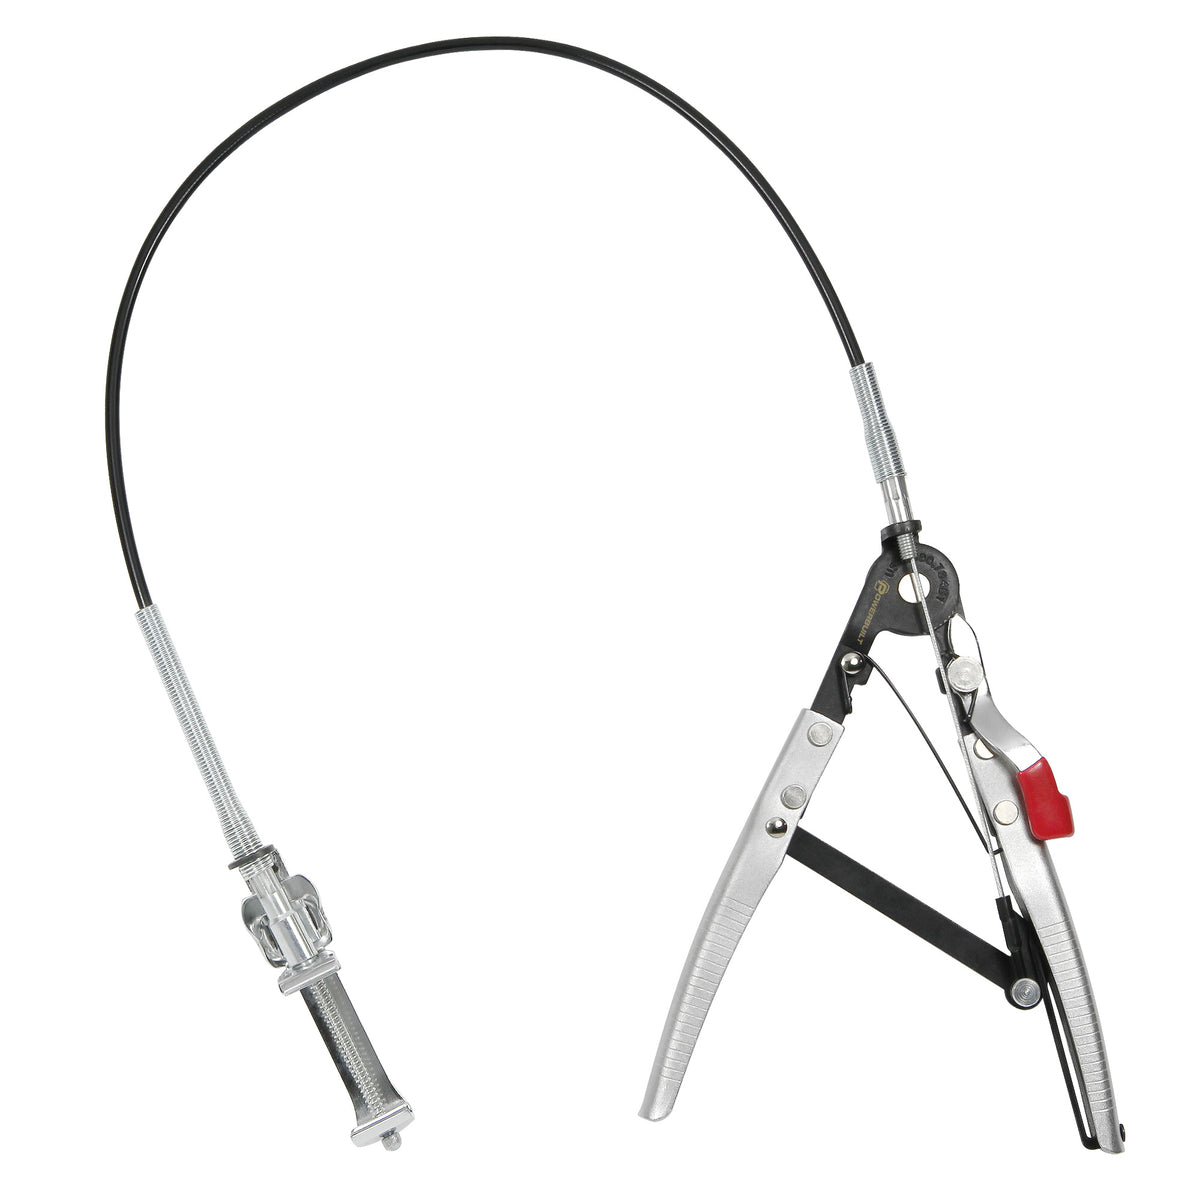 24 in. Flexible Hose Clamp Pliers